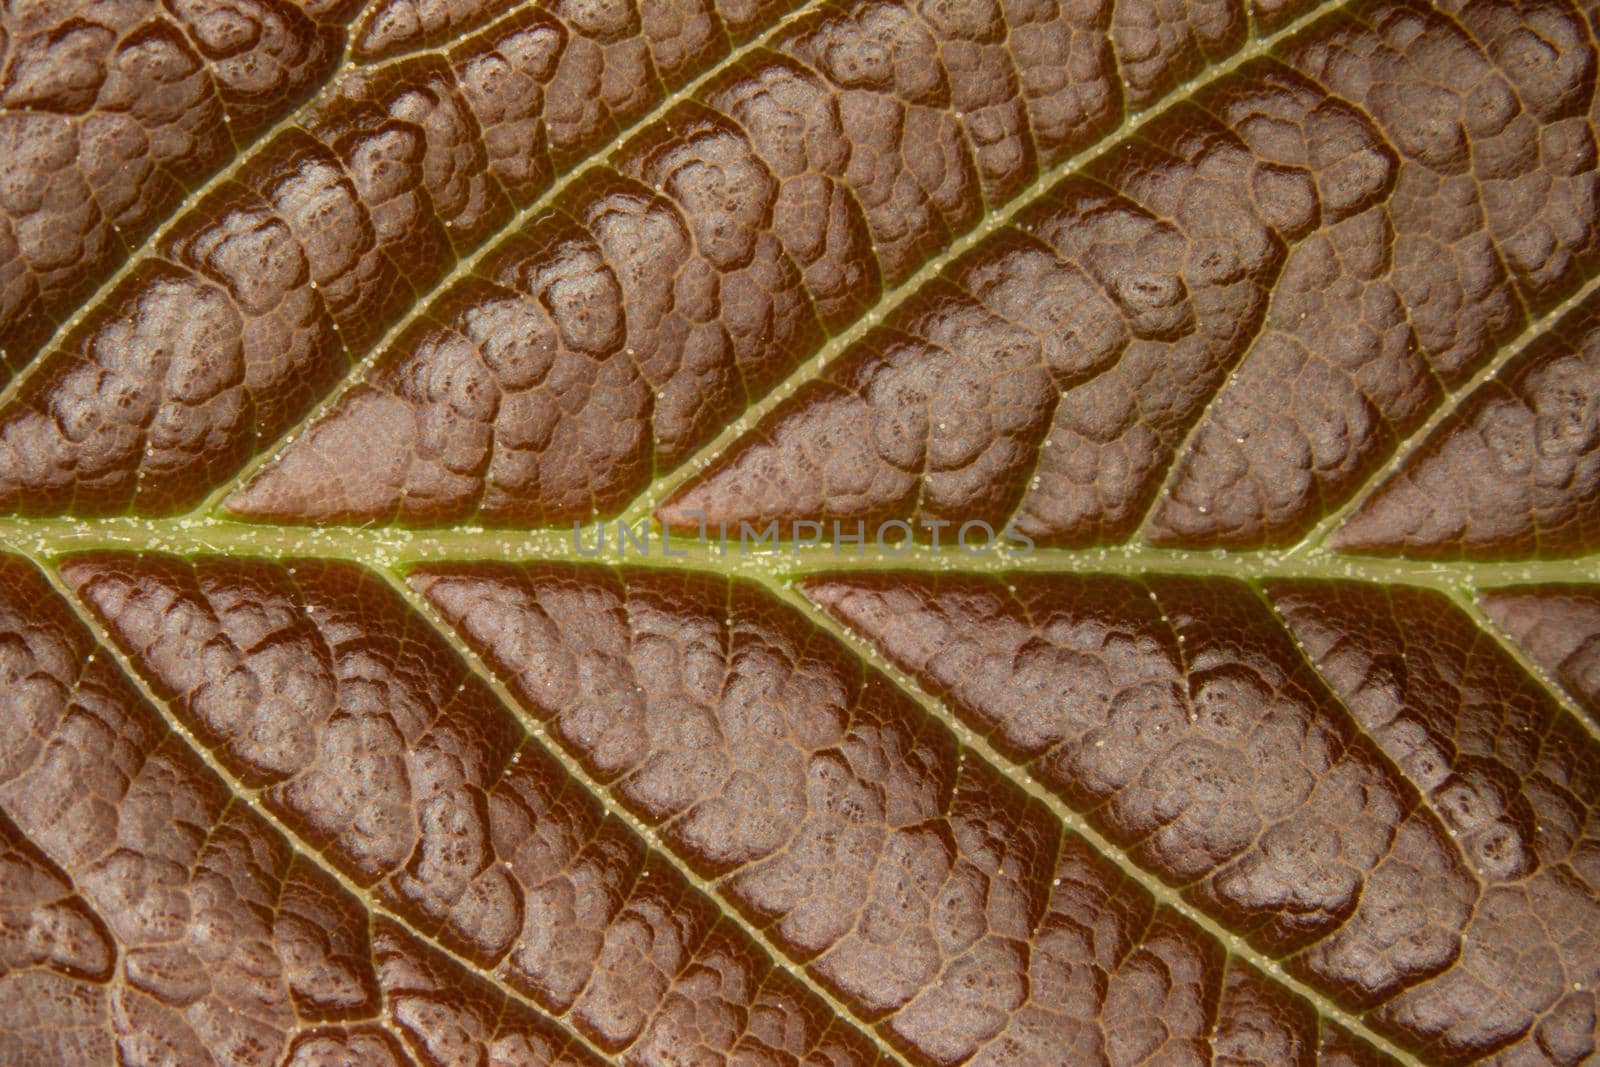 Leaf of a deciduous tree with leaf veins under a magnifying glass